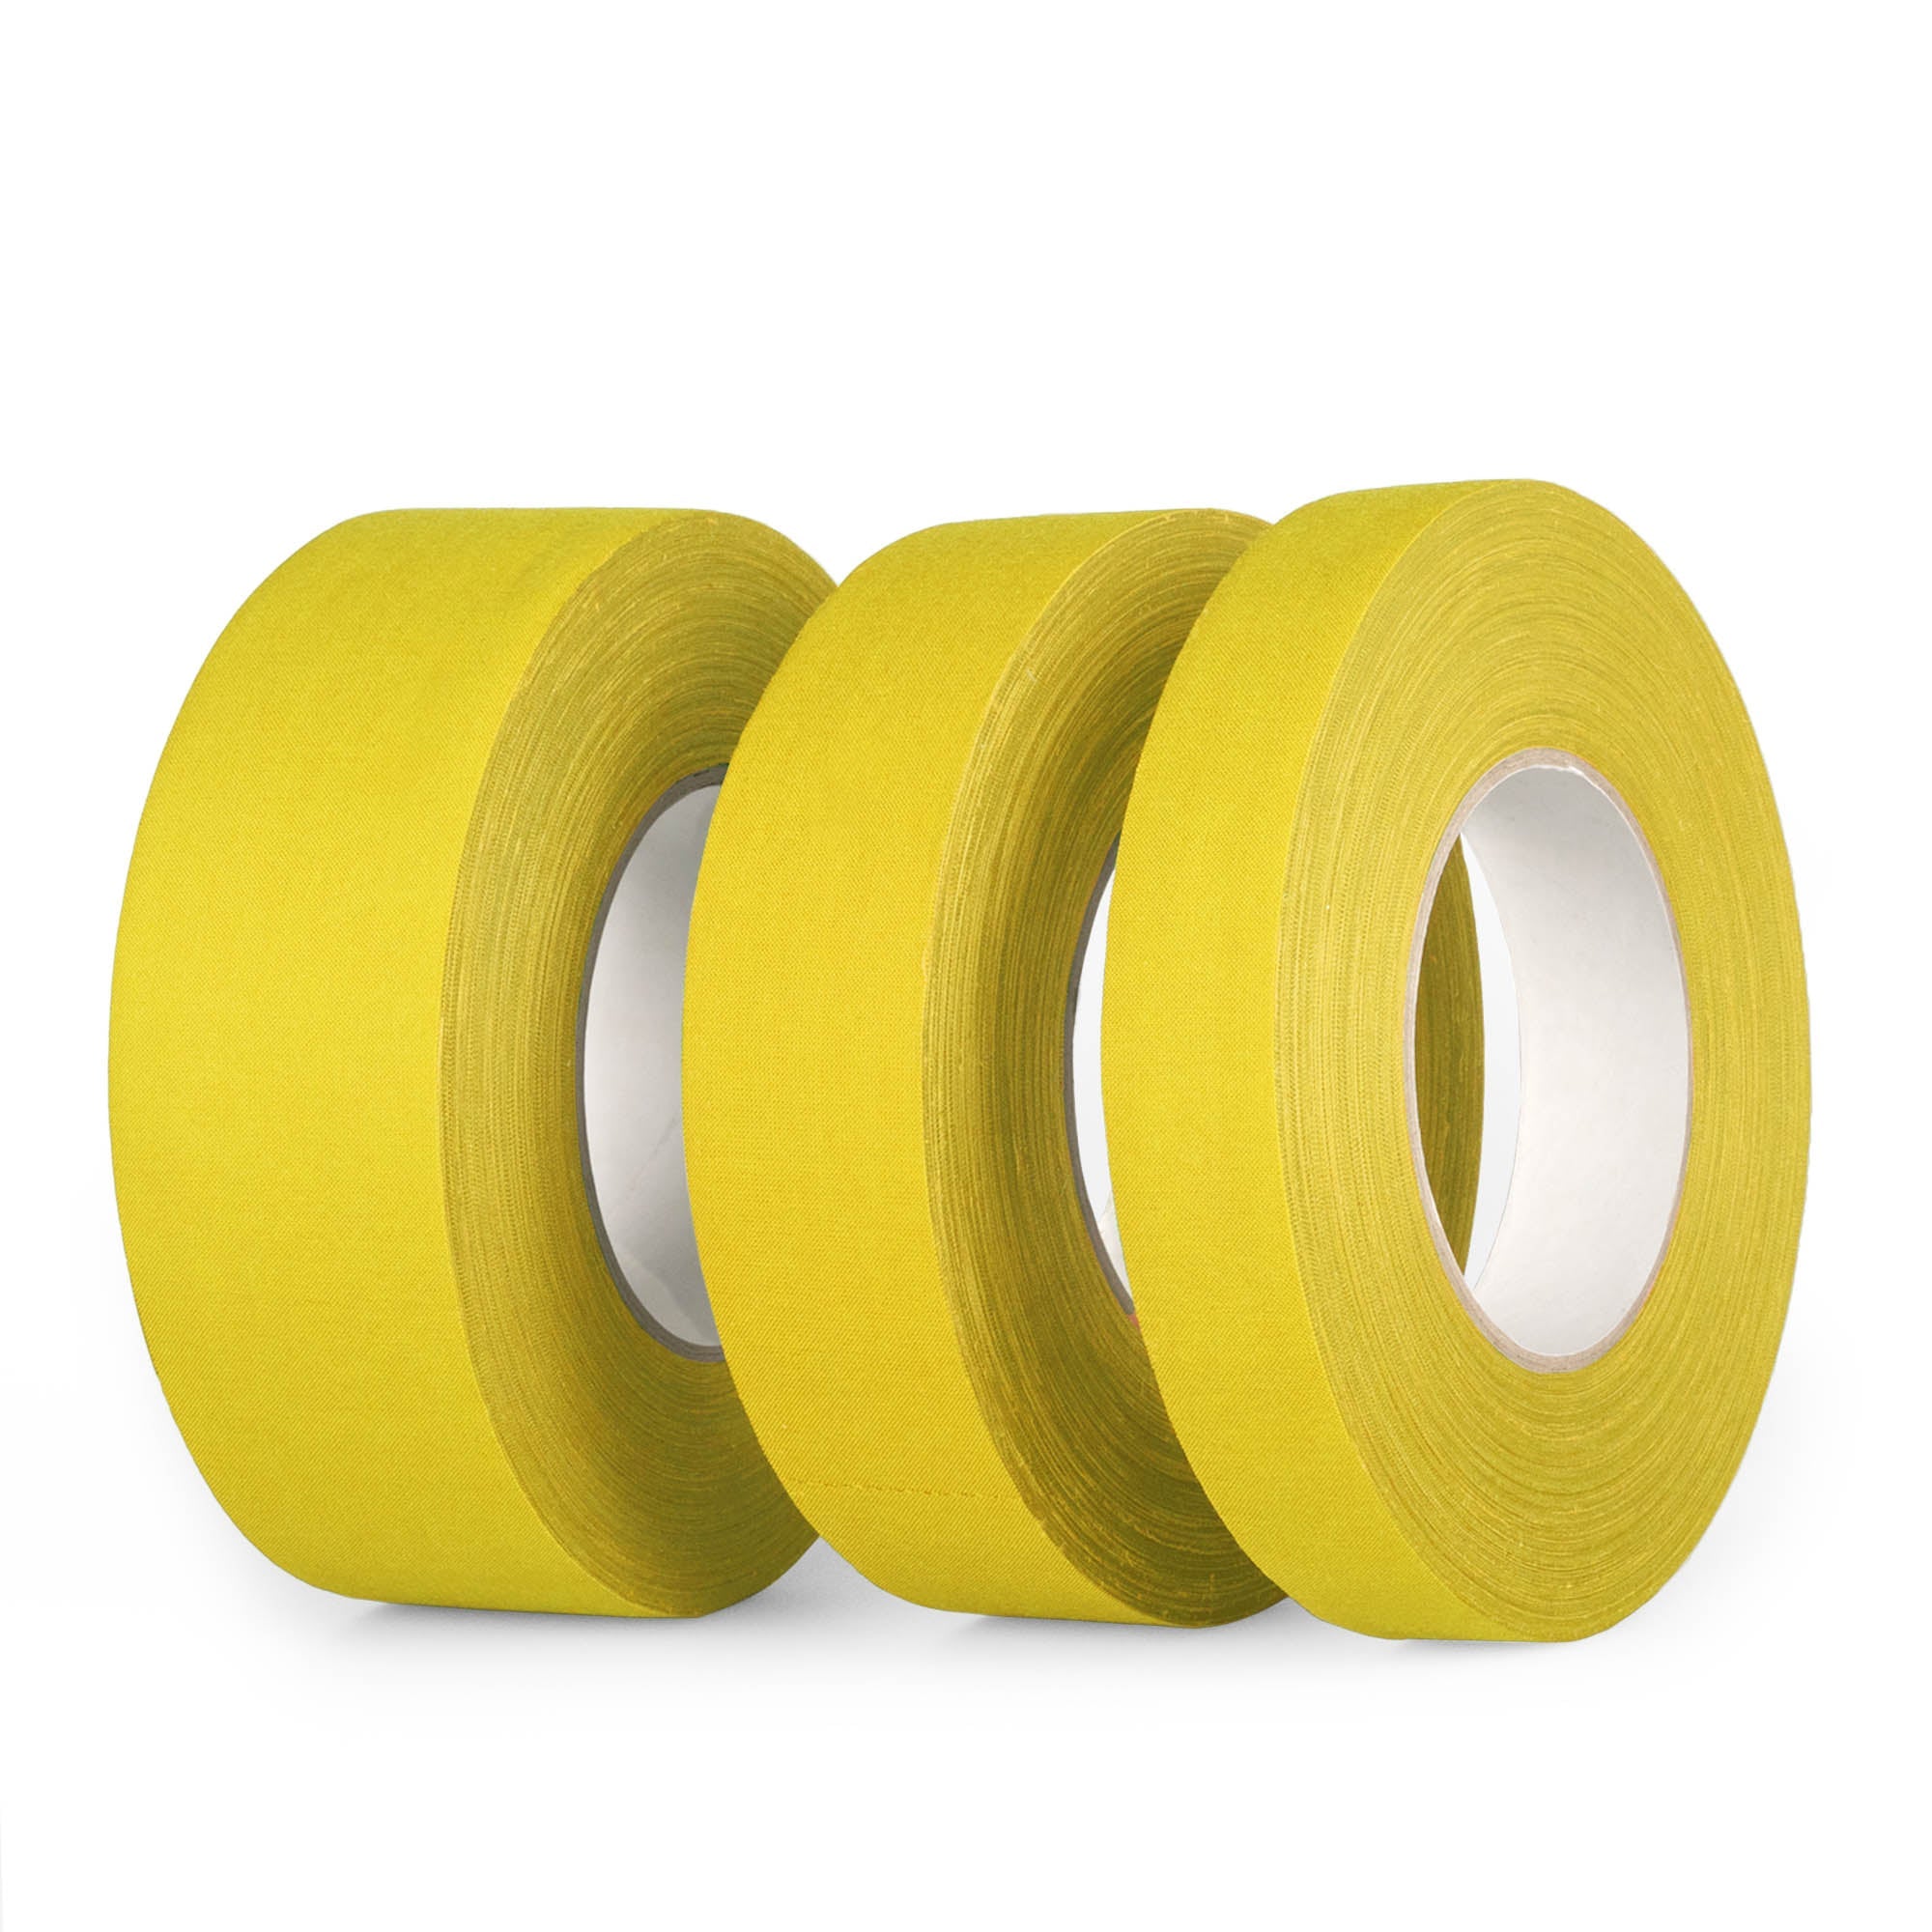 3 sizes of yellow tape